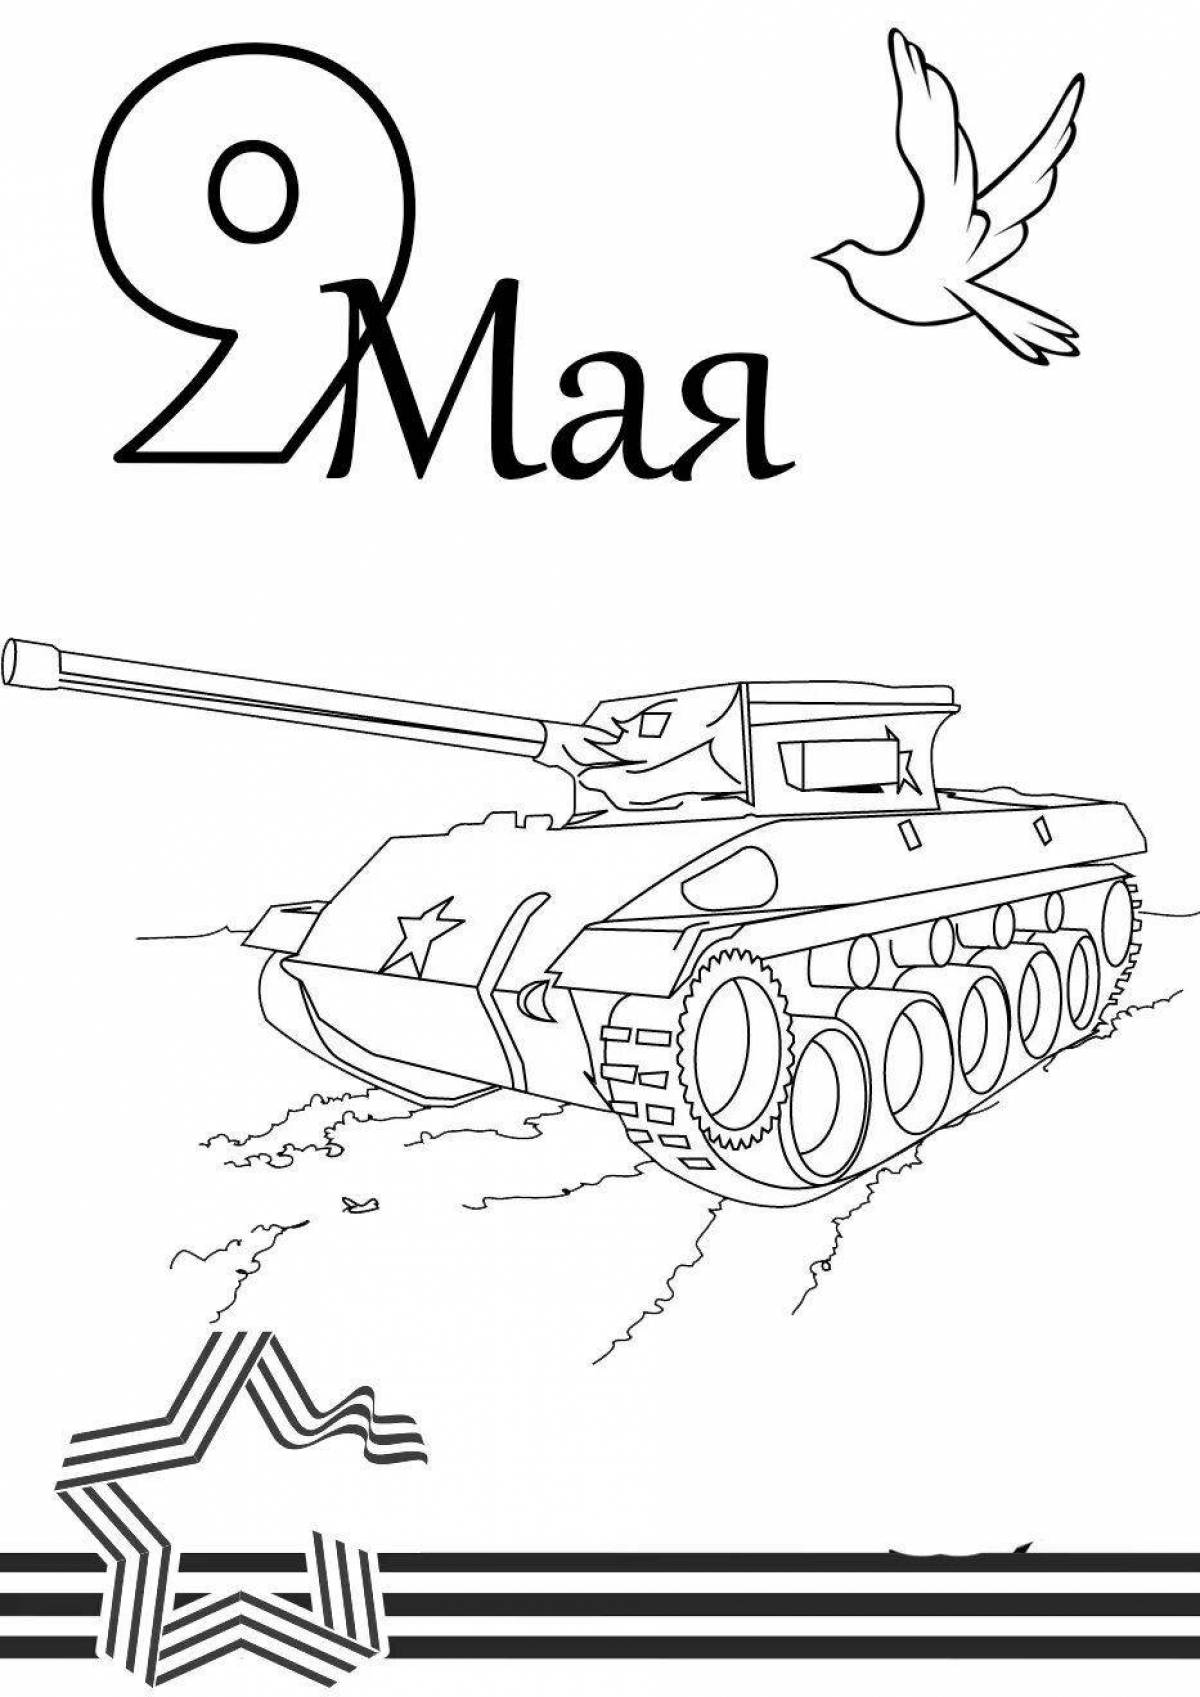 May 9th victory day coloring page